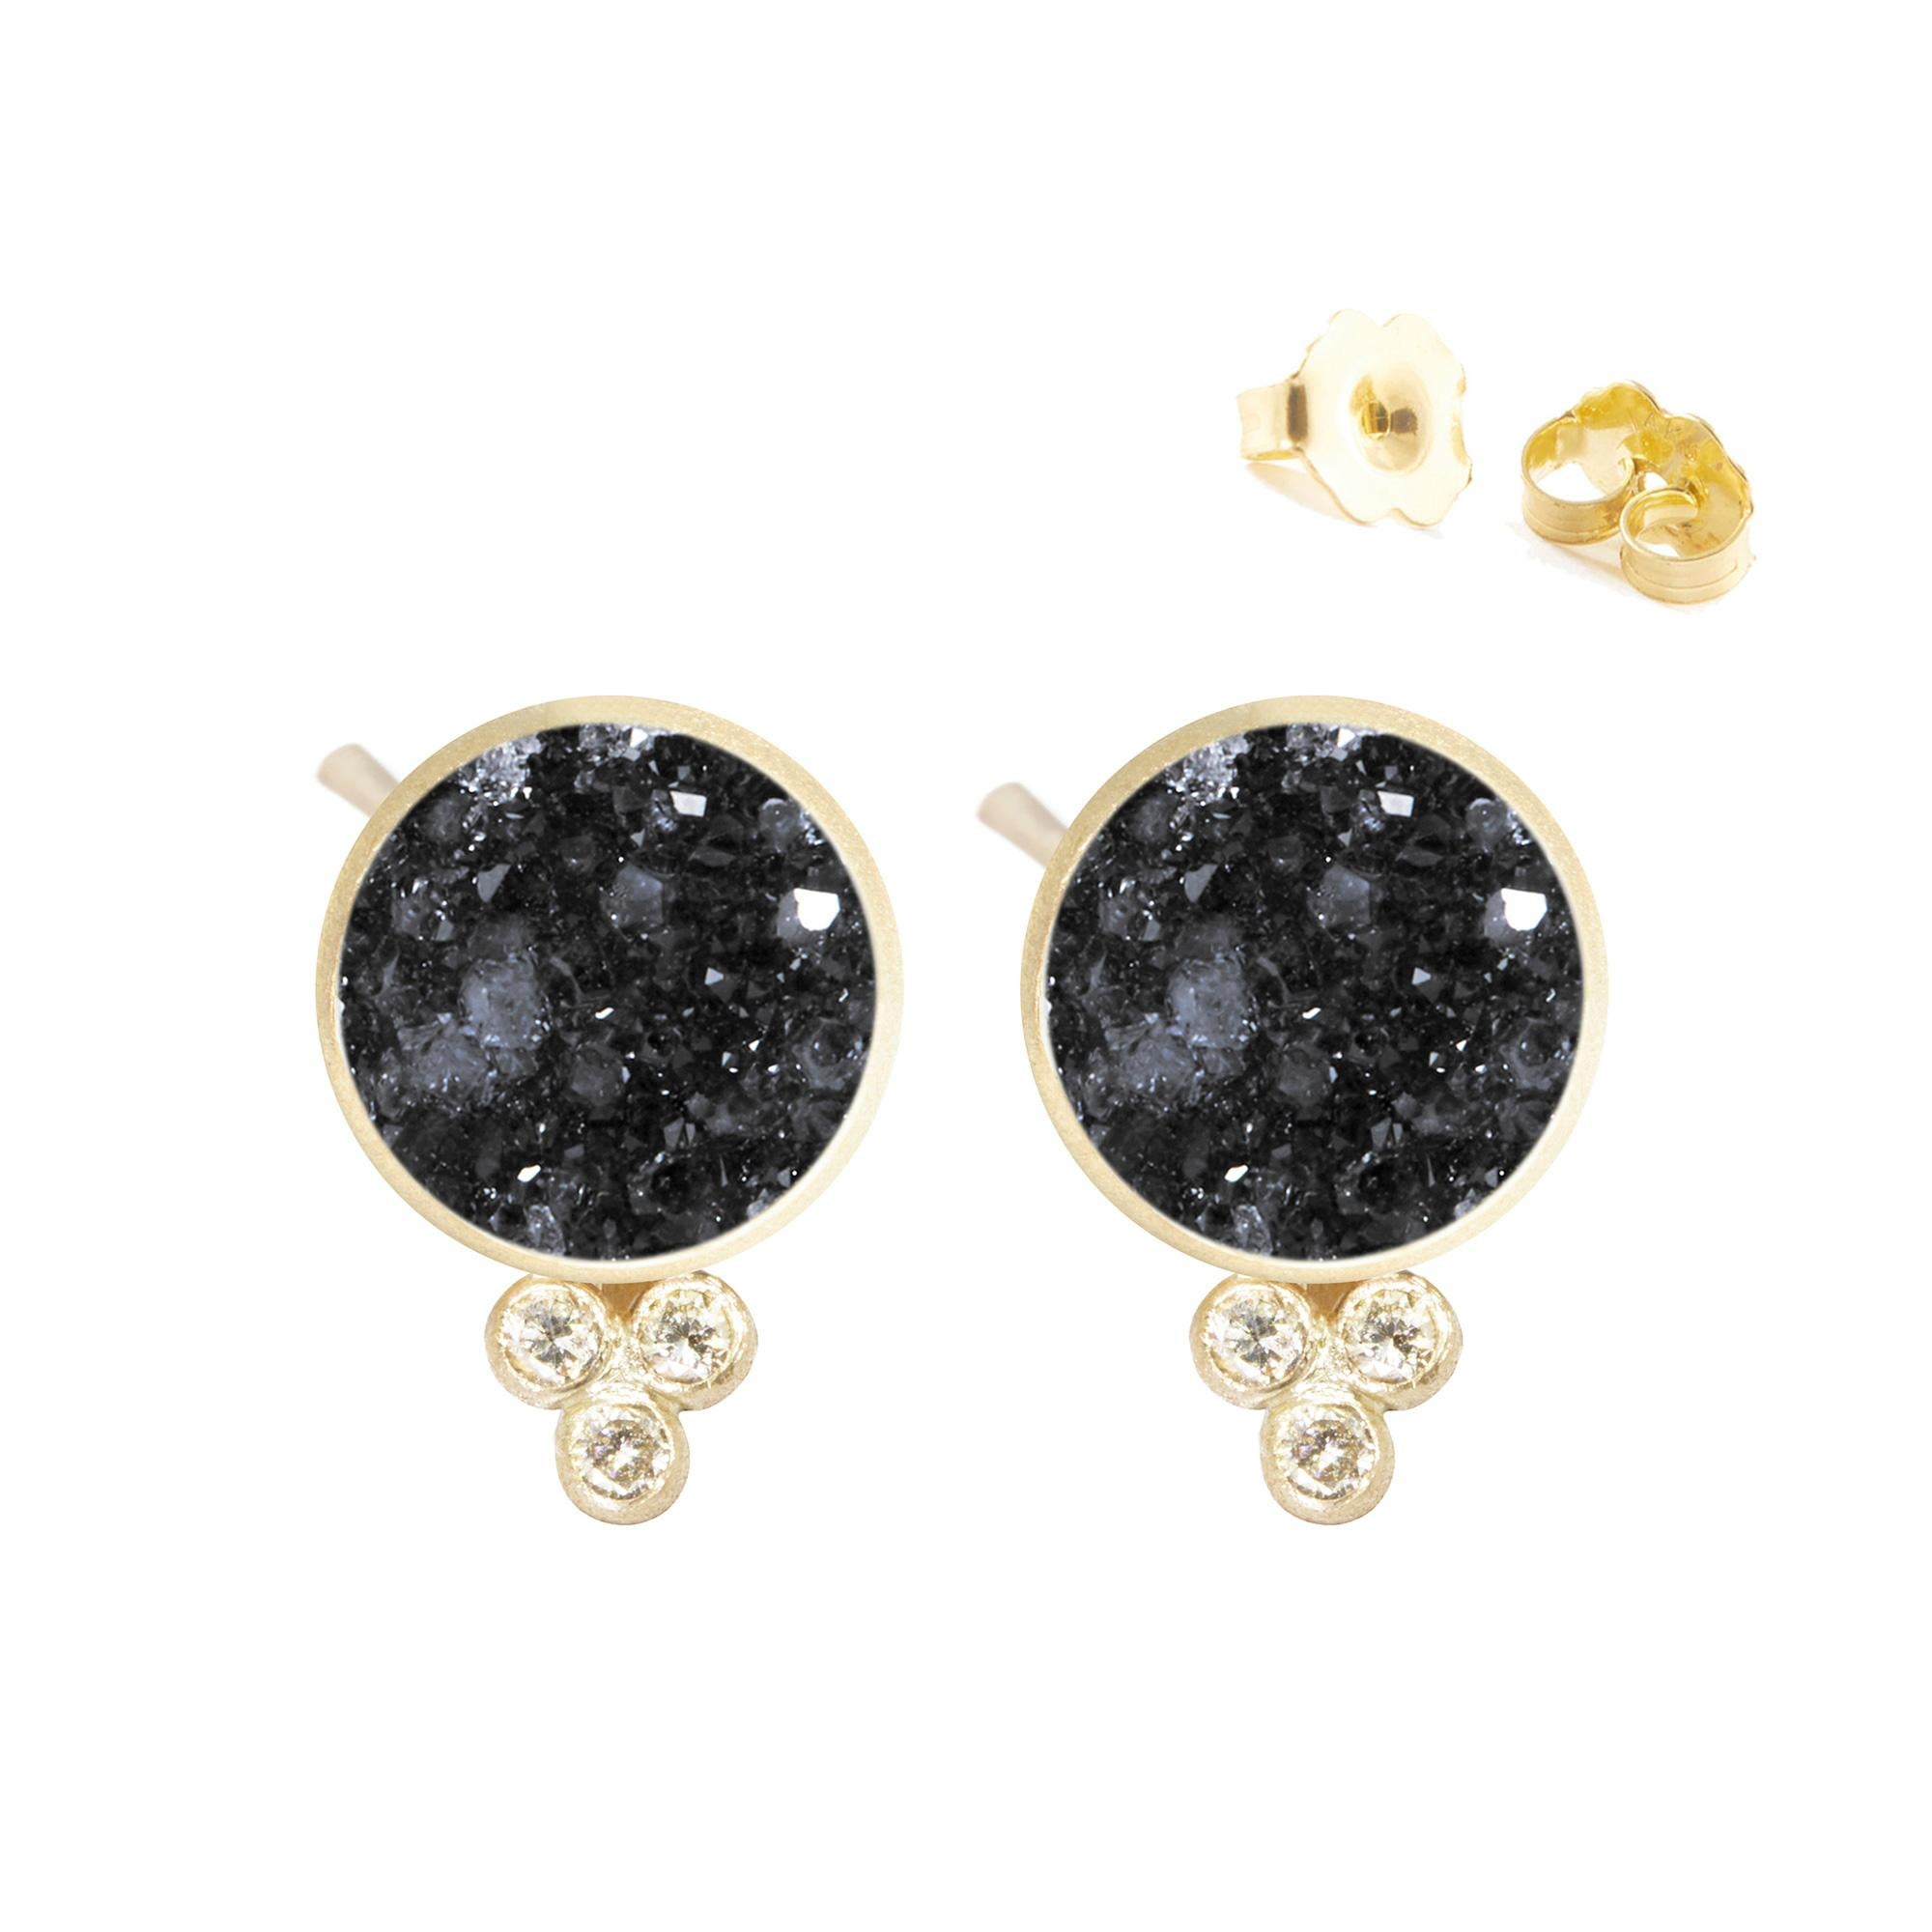 A Nina Nguyen classic: Our Chloe Gold Studs are designed with black druzy rimmed in gold, and accented with diamonds for some extra sparkle.

Nina Nguyen Design's patent-pending earrings have an element on the back of the stud or charm to allow